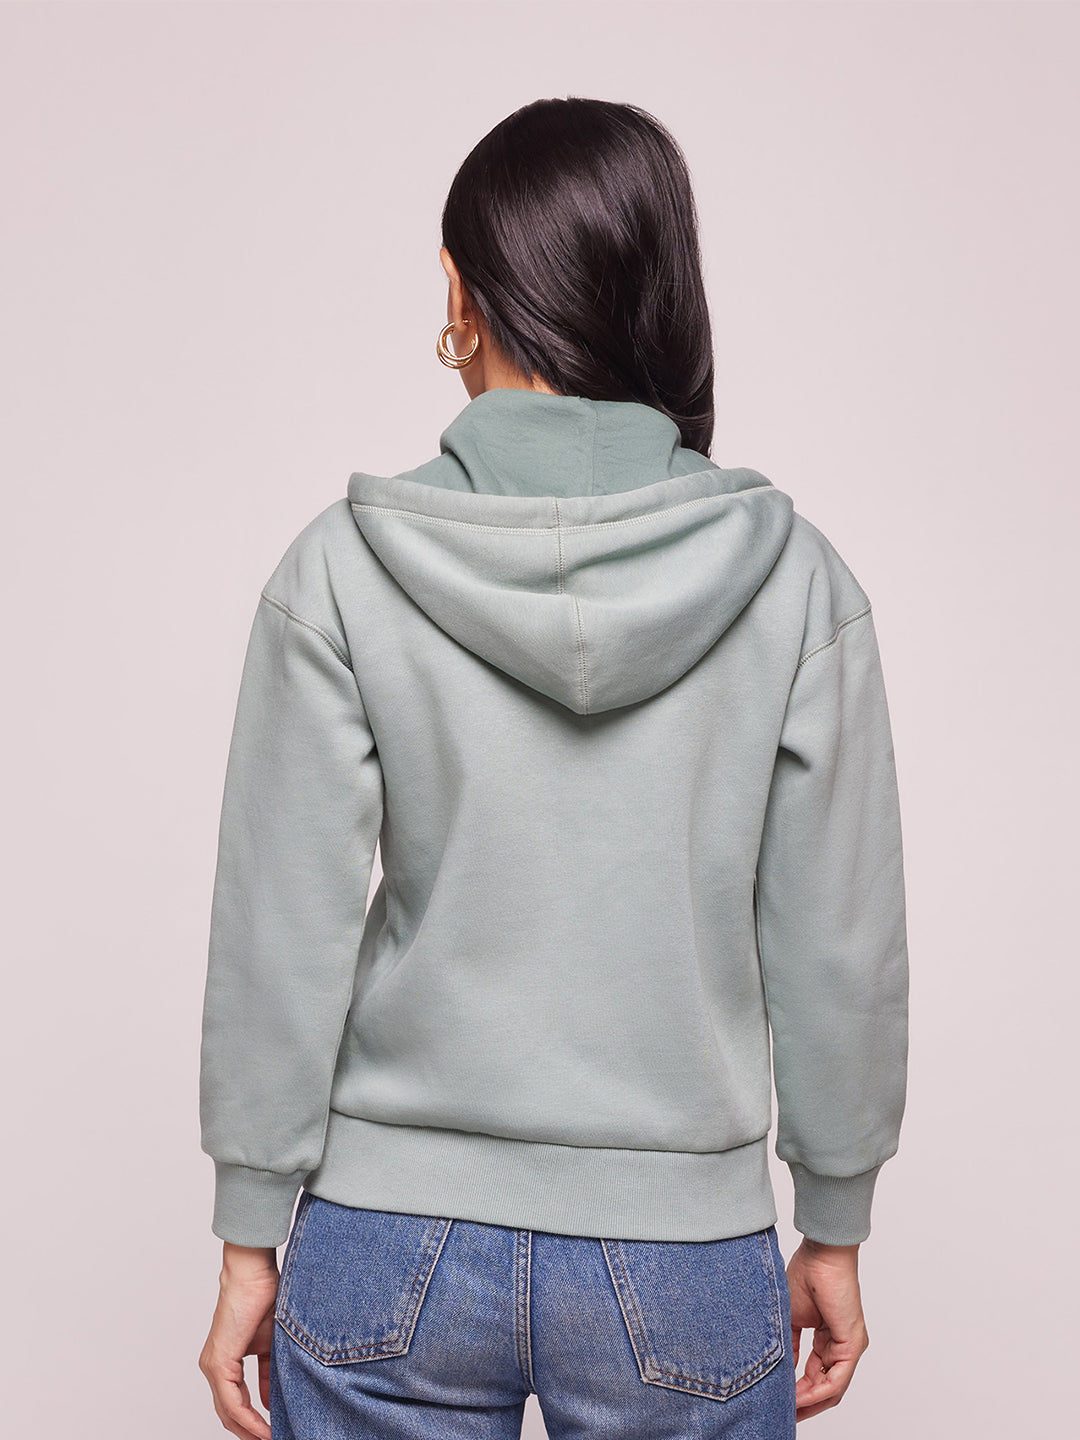 Bombay High Women's Solid Sage Green Knit Hoodie Jacket